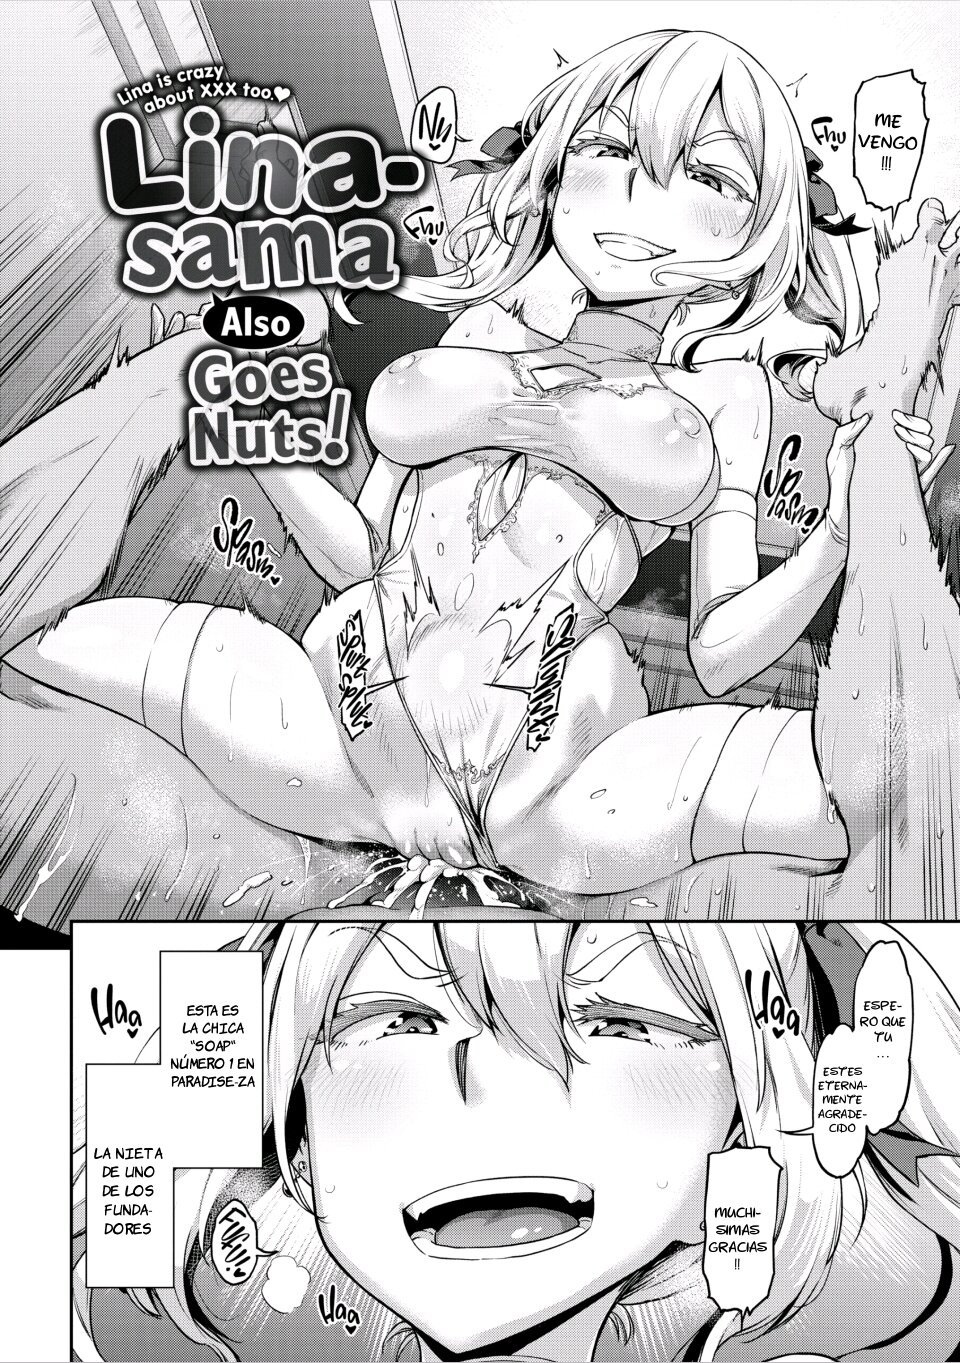 Lina is crazy about XXX to Lina-sama Also Goes Nuts! - 2